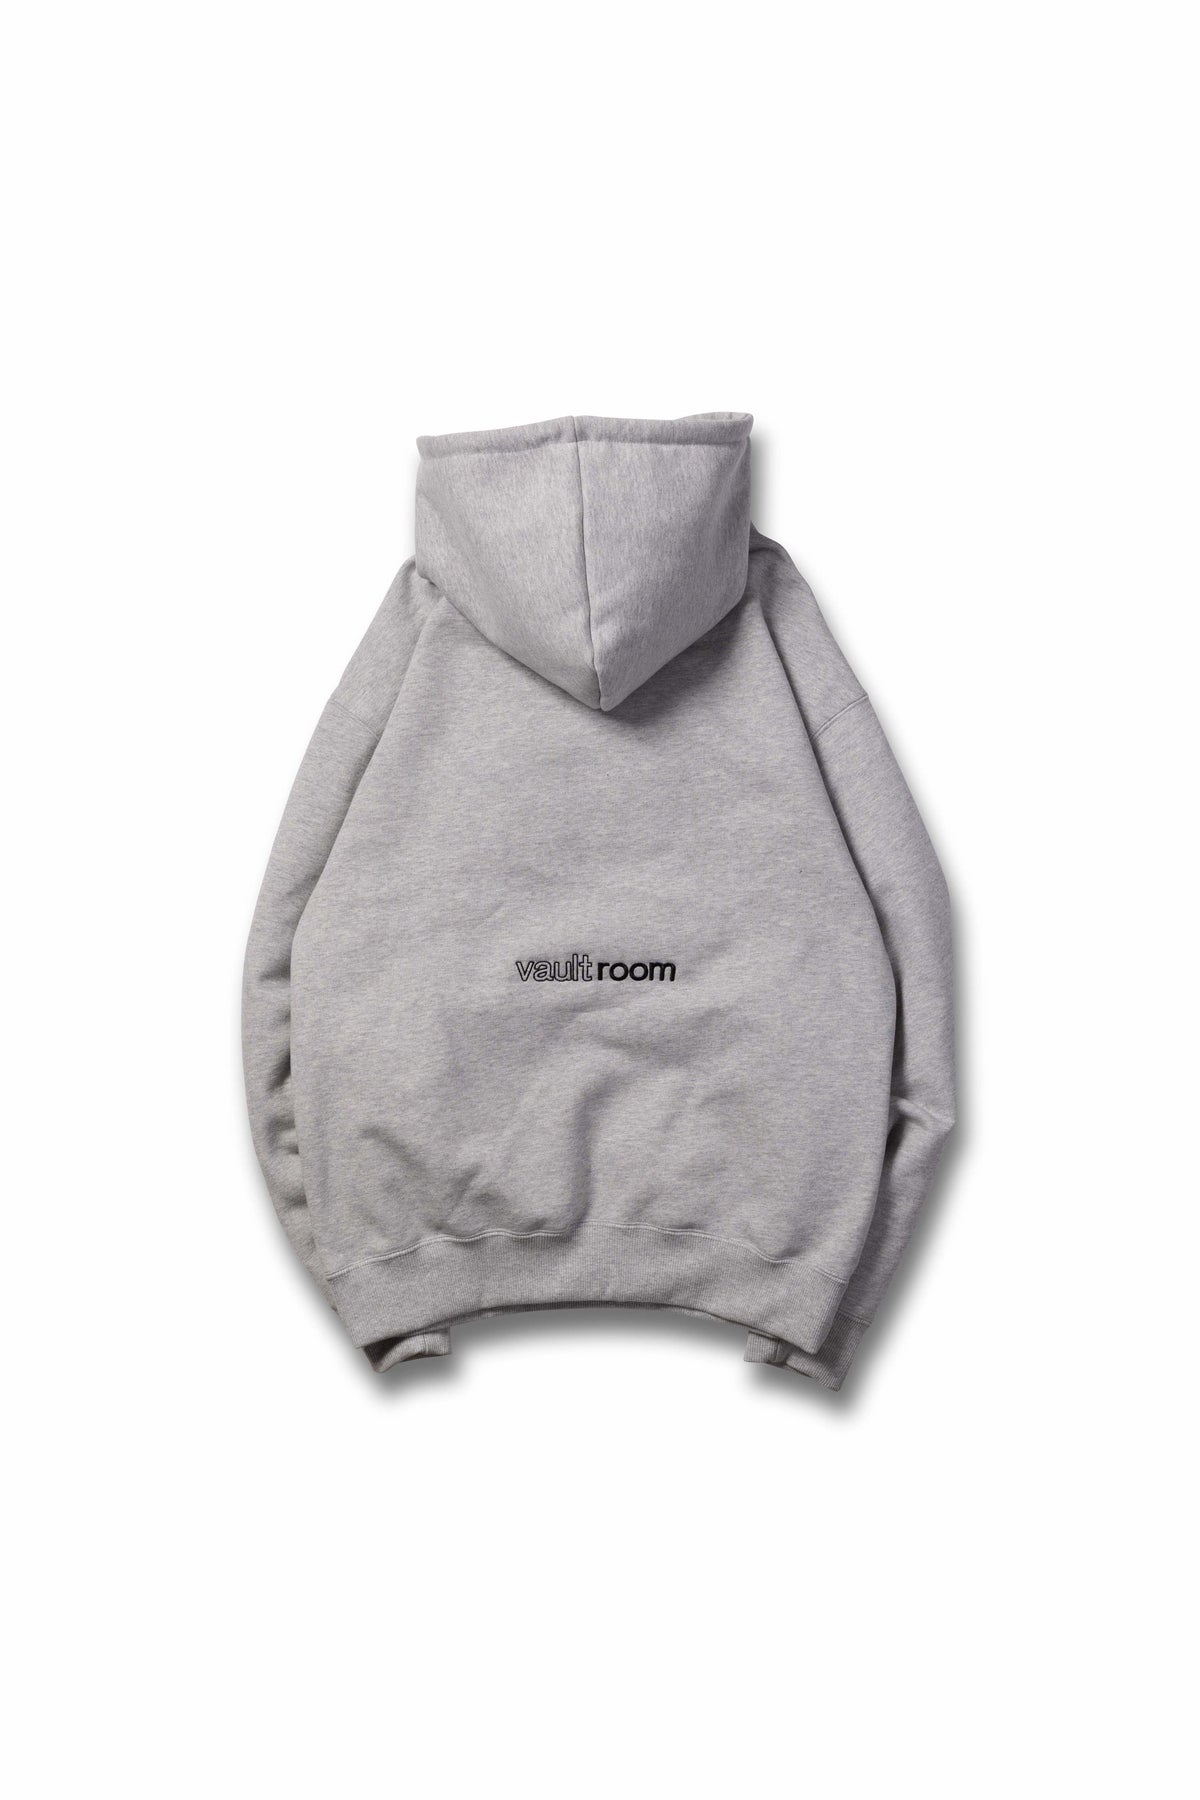 vaultroom ROM ONLY HOODIE / GRYサイズ公式サイトより